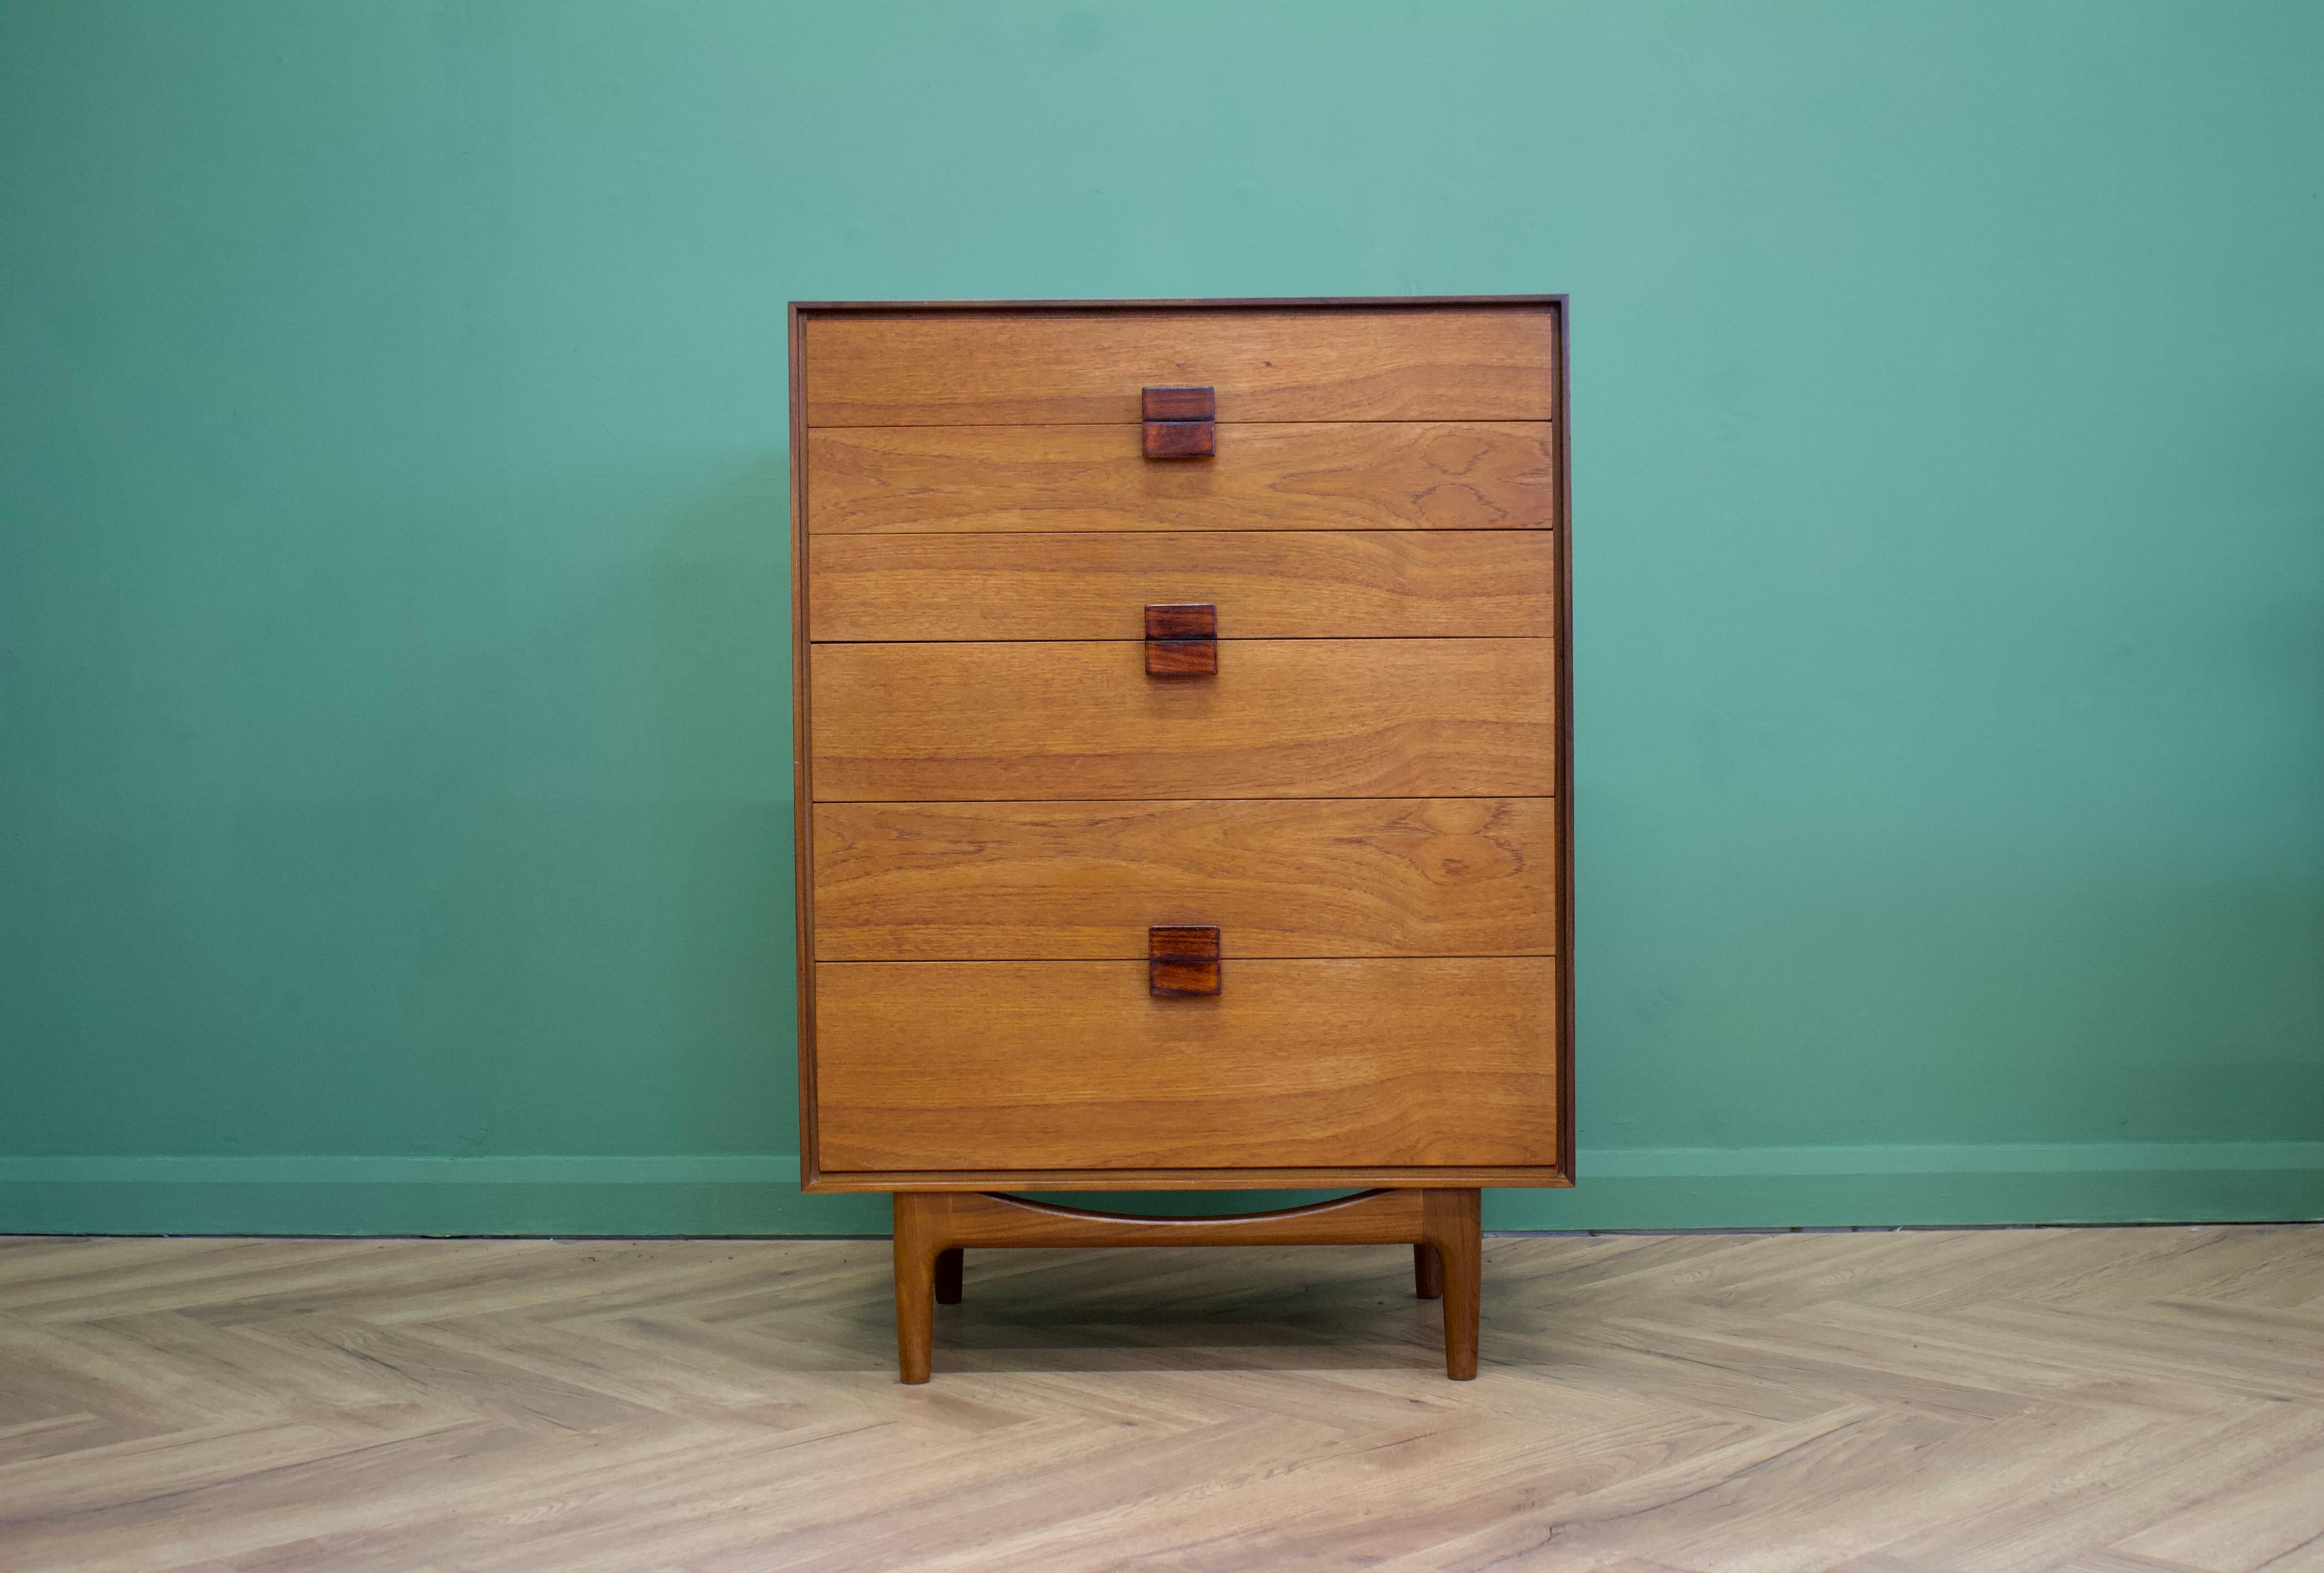 - Mid-century tallboy chest of drawers.
- Danish Design by Kofod Larsen.
- Manufactured in the UK by G - Plan.
- Made from solid teak & teak Veneer.
- Features 6 drawers.